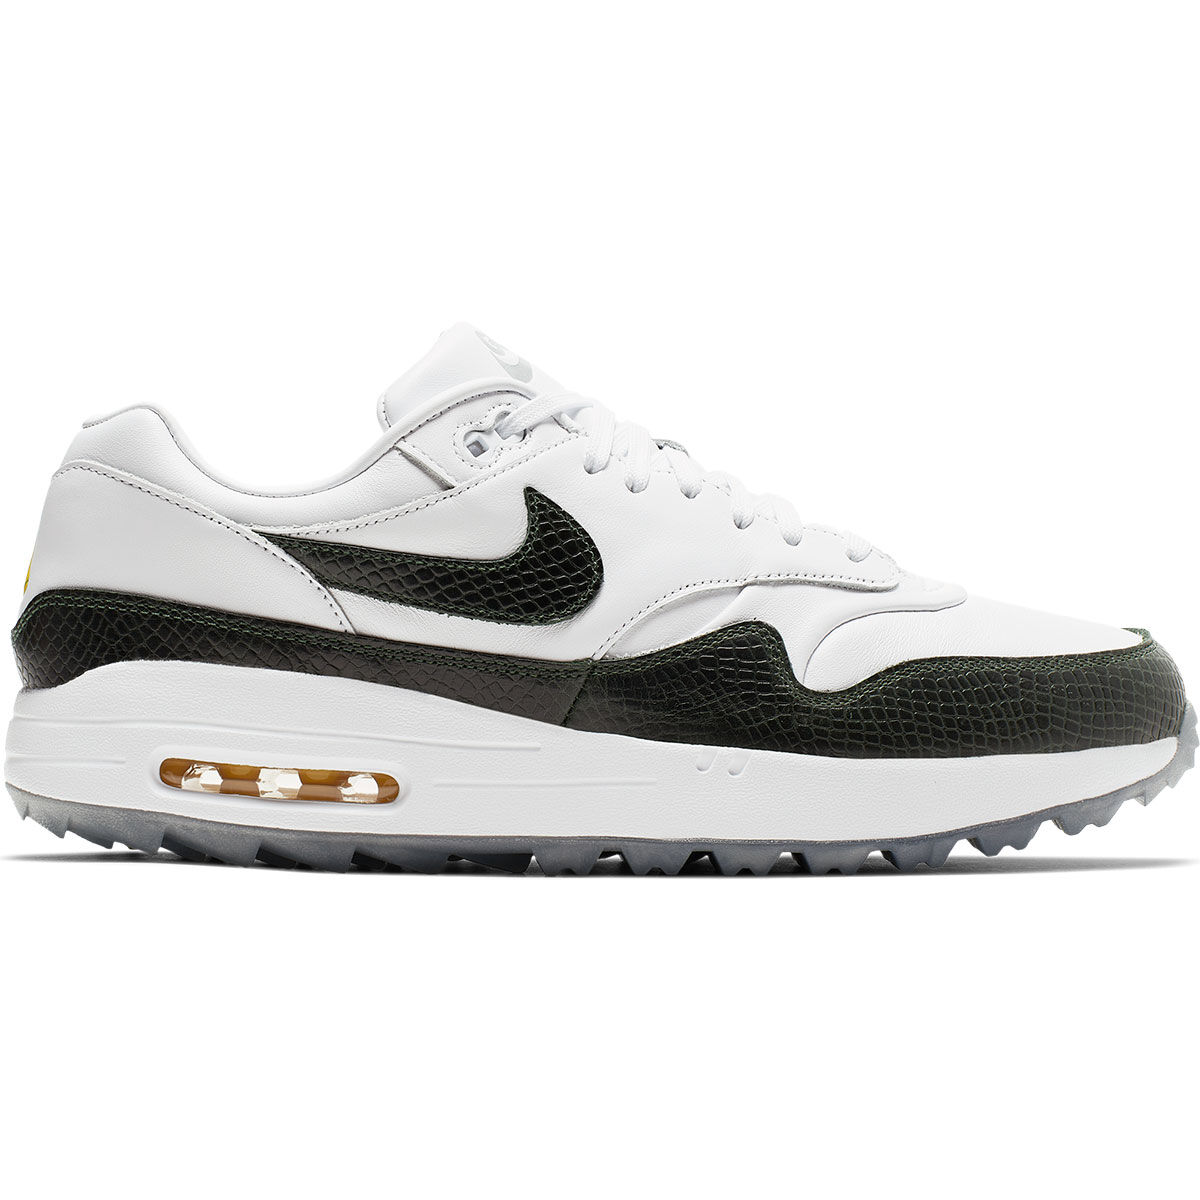 Nike Golf Air Max 1G NRG Shoes from 